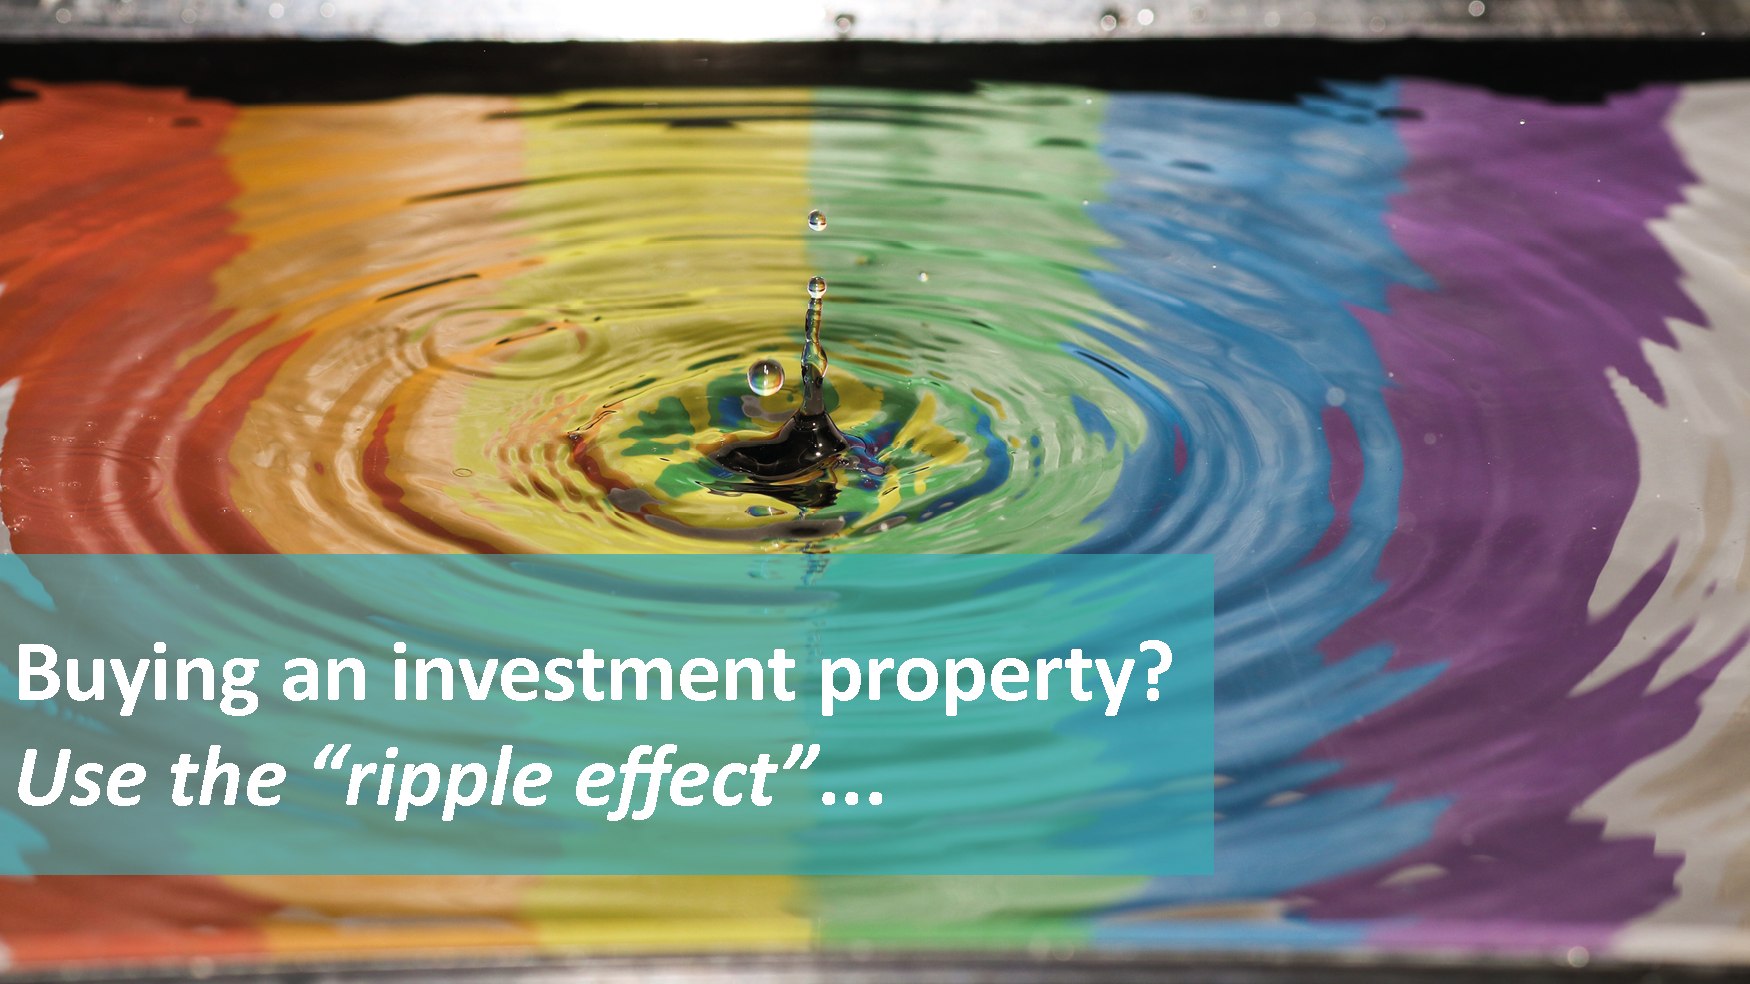 The Investment Property Ripple Effect